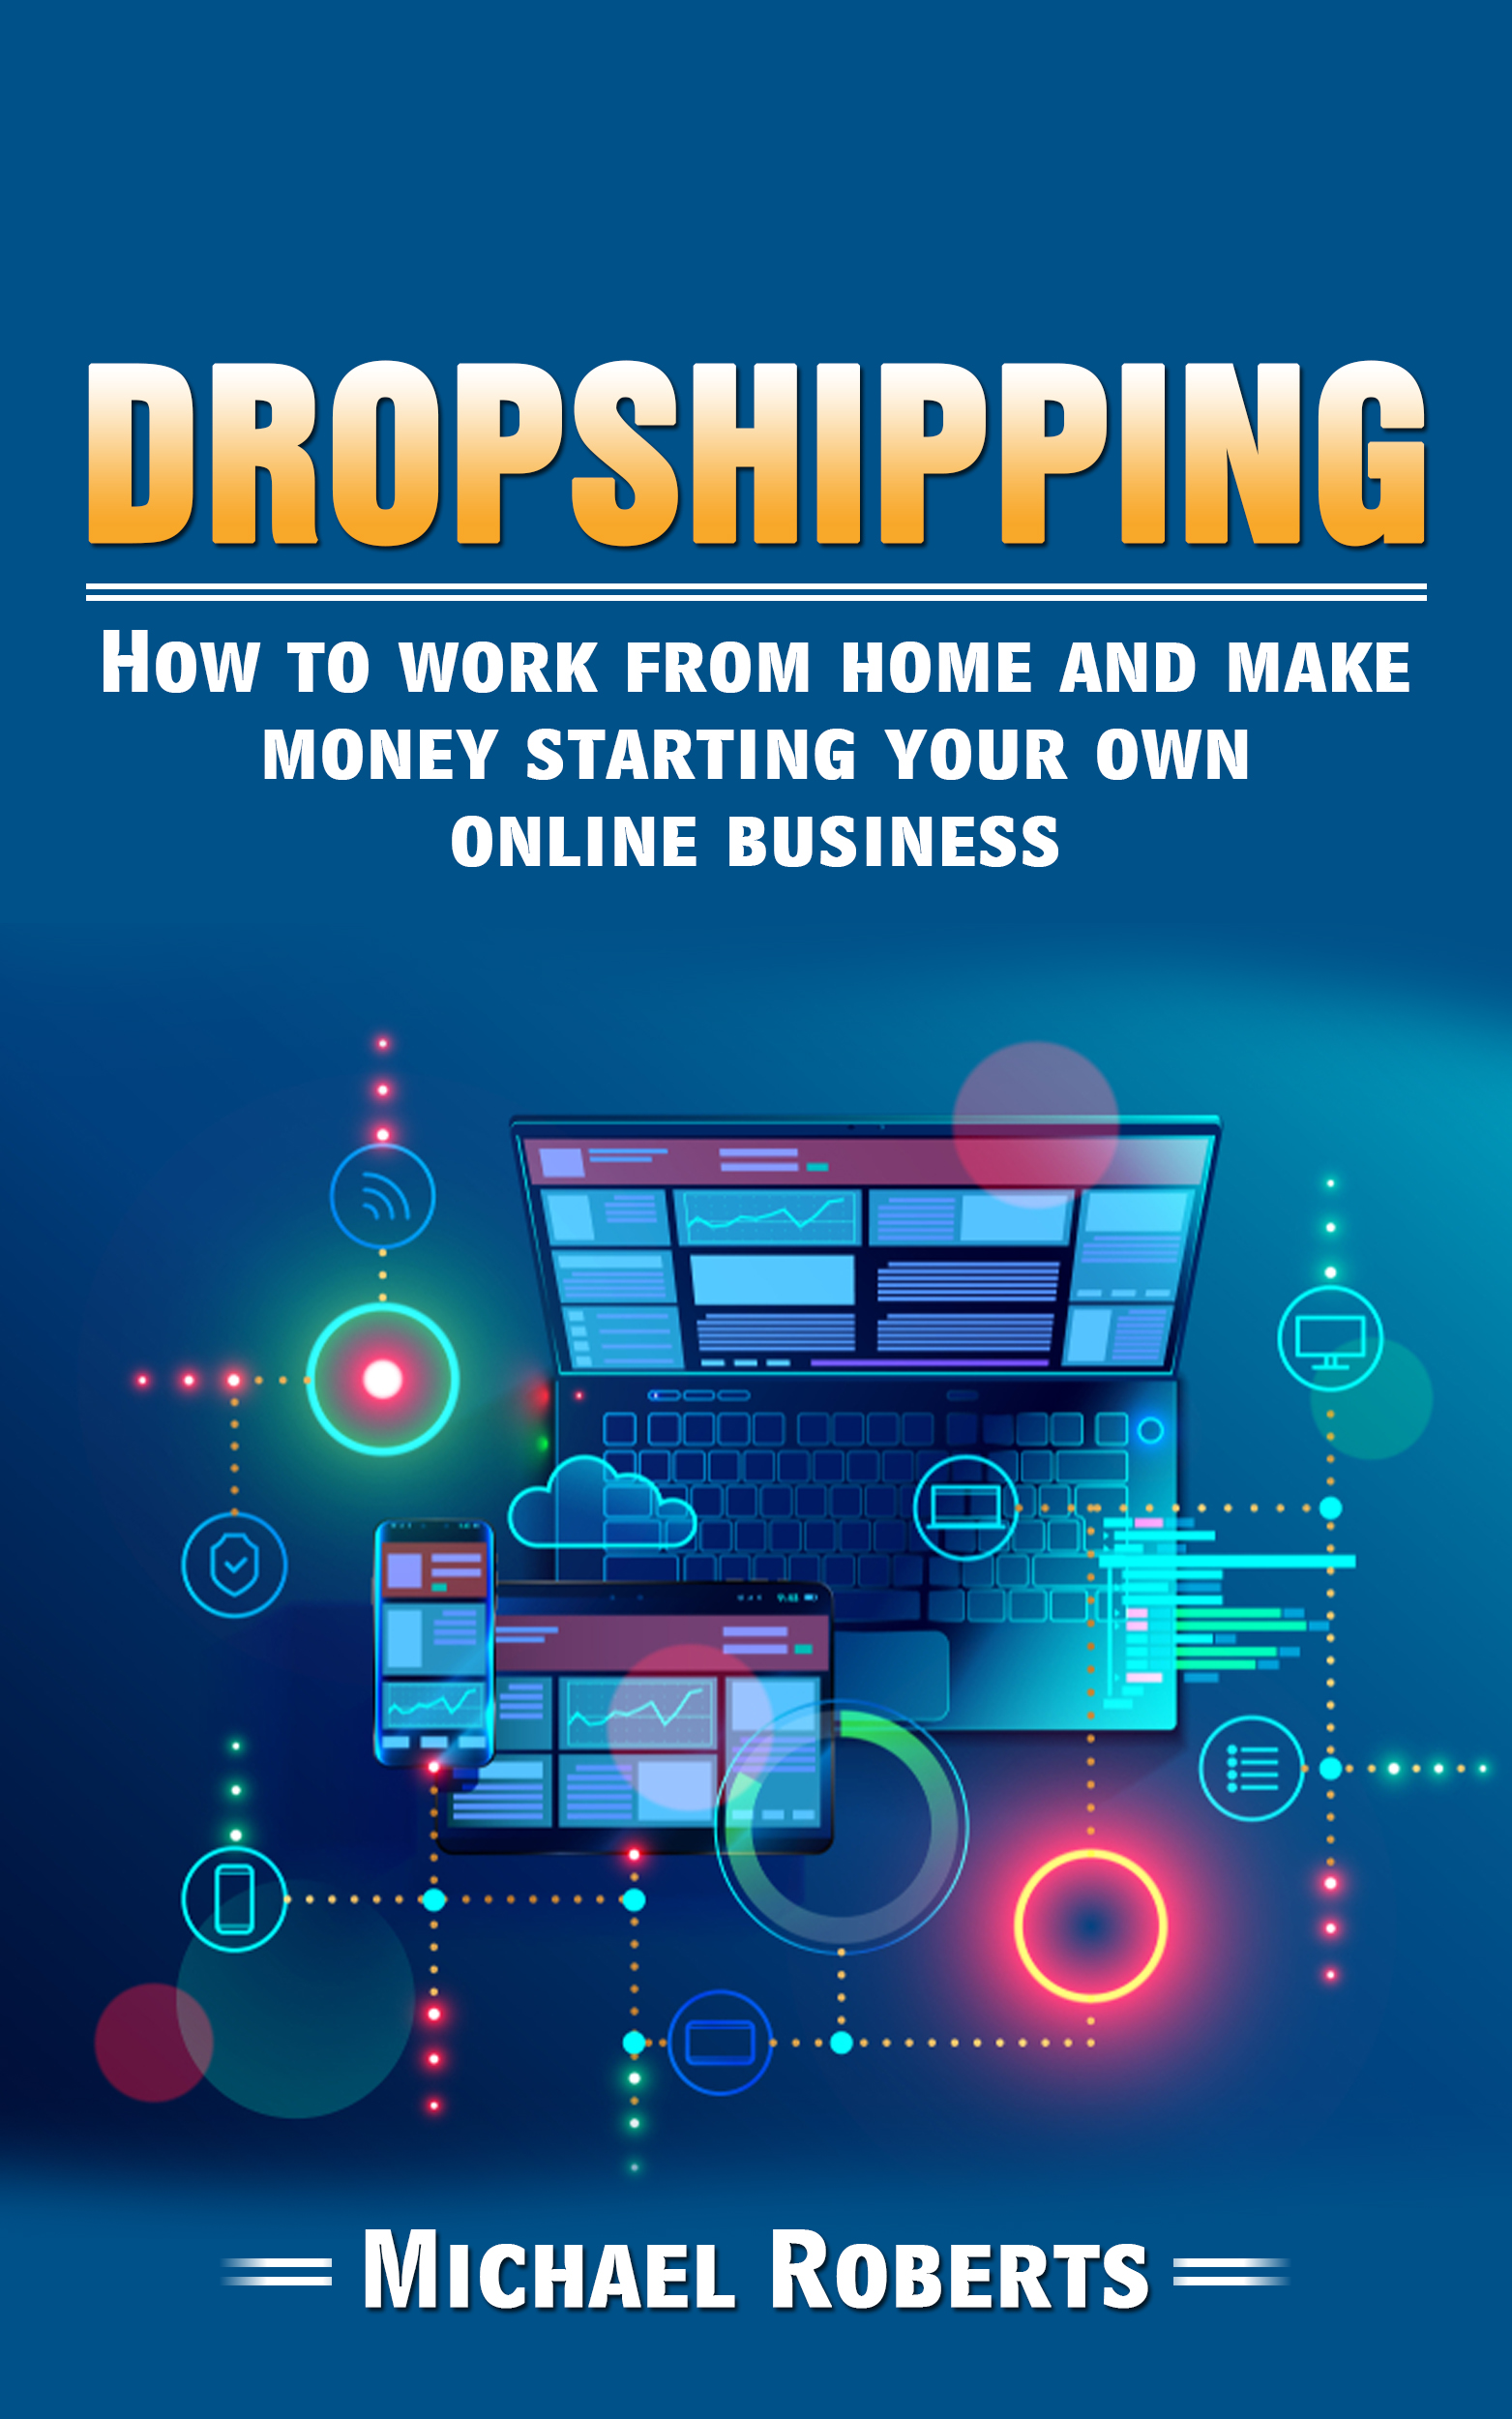 FREE: Dropshipping: How To Work From Home And Make Money Starting Your Own Online Business by Michael Roberts by Michael Roberts